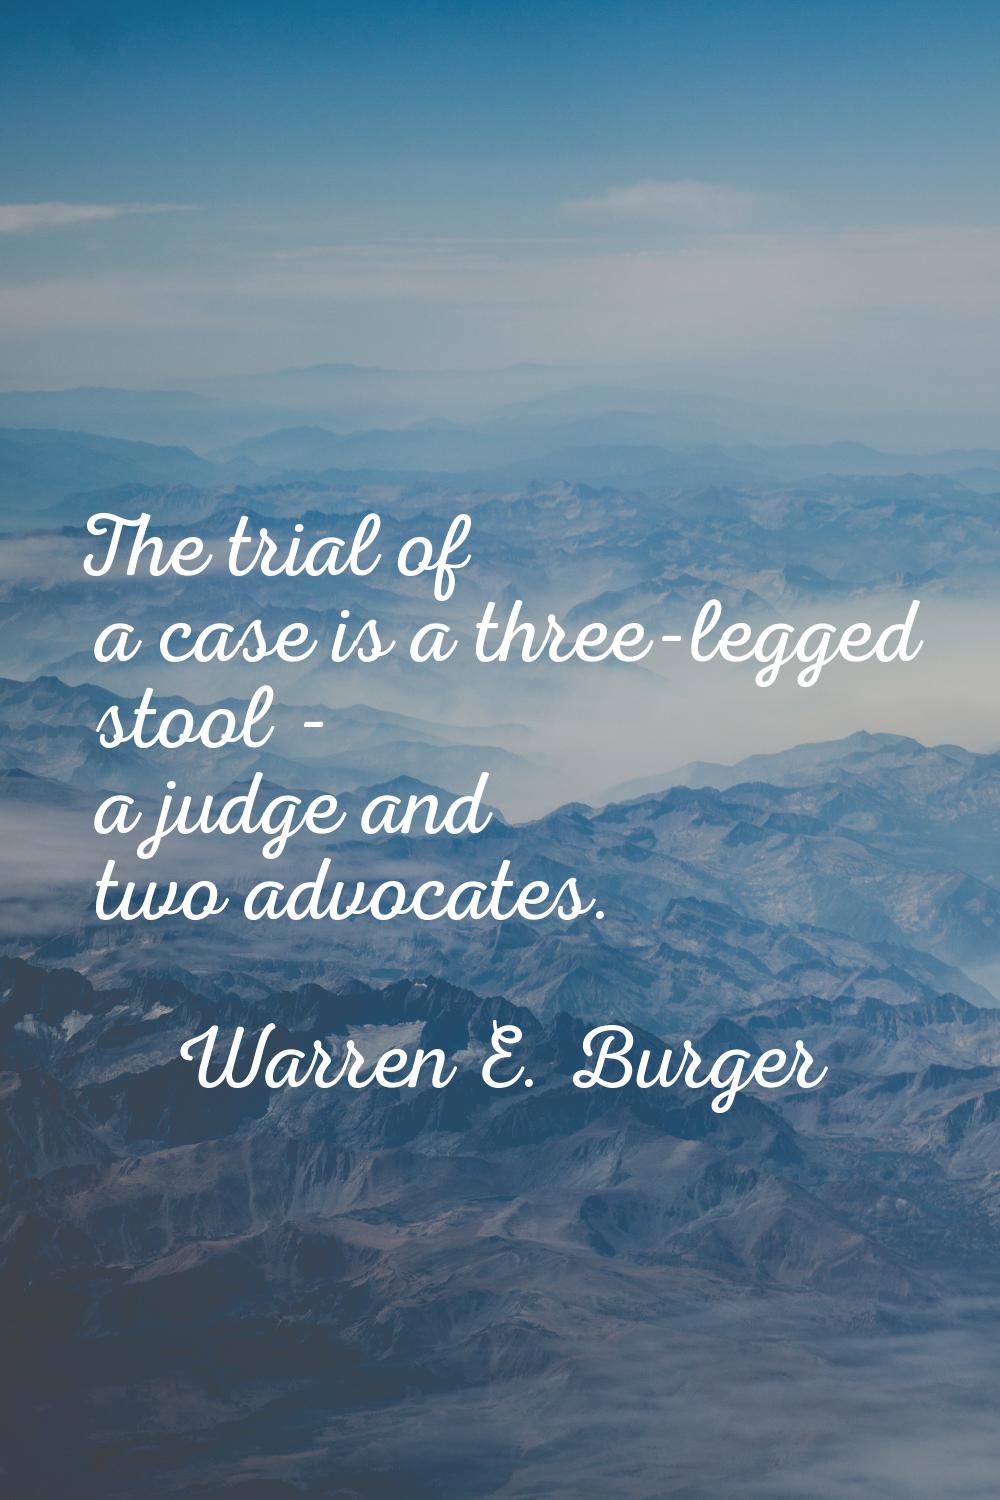 The trial of a case is a three-legged stool - a judge and two advocates.